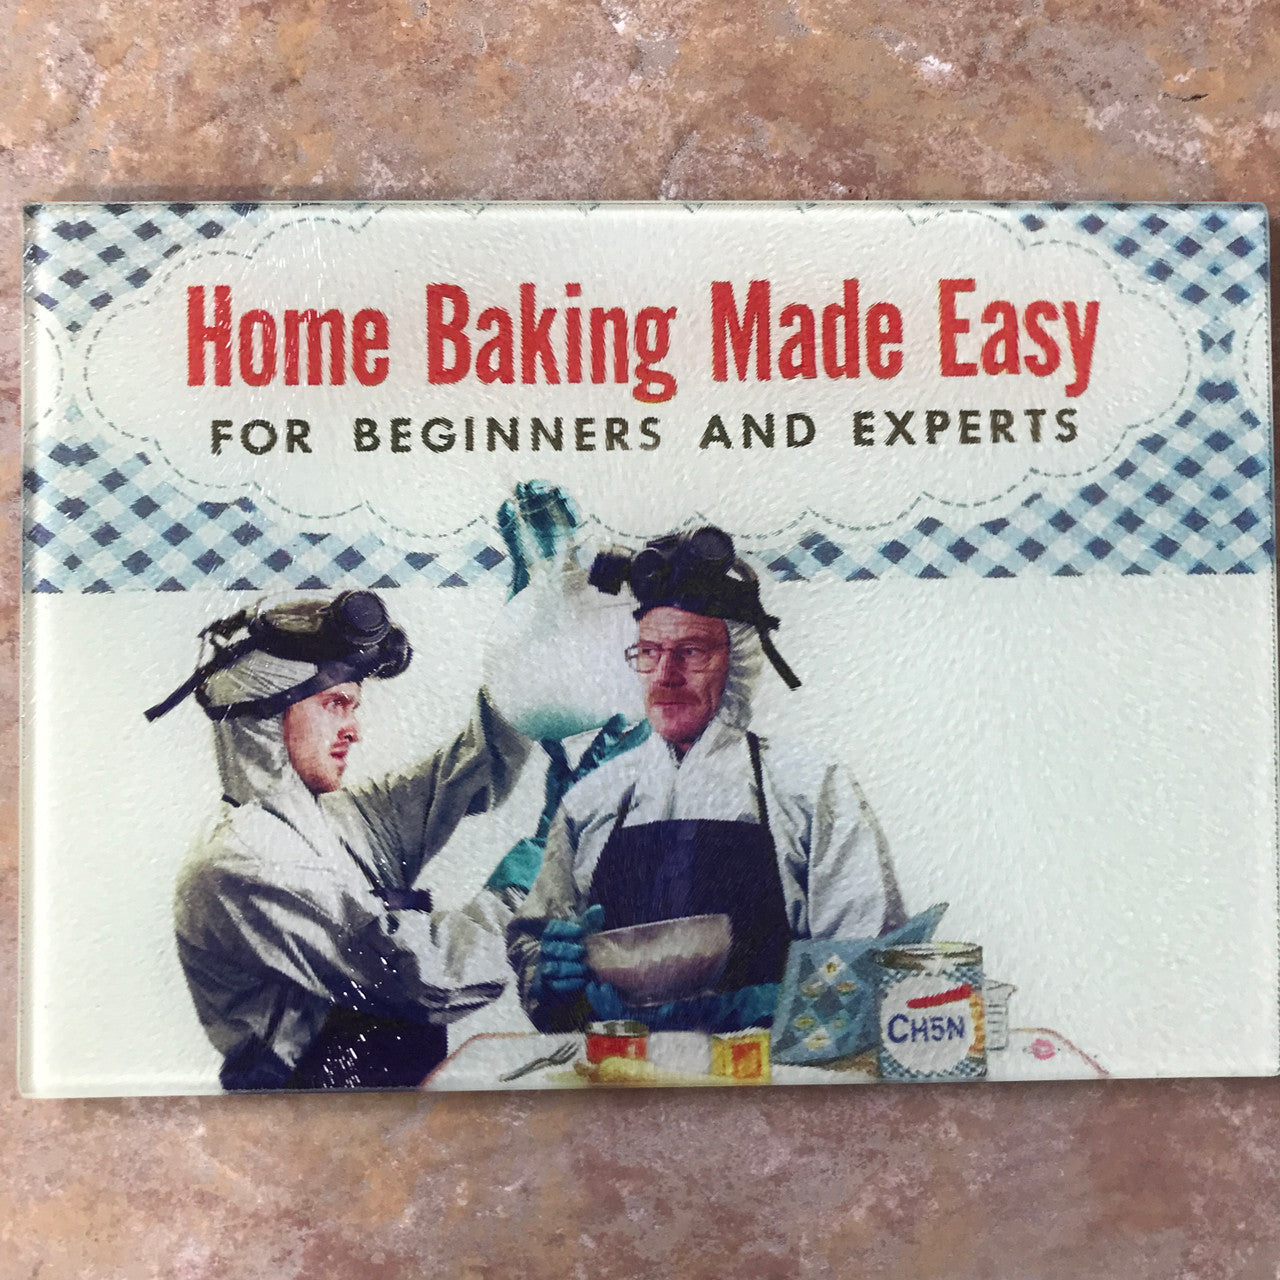 Baking Breaking Bad KiSS Chopping Board - Jesse Pinkman and Walter White - 30s 40s recipe book style - Vintage theme - Kitchen